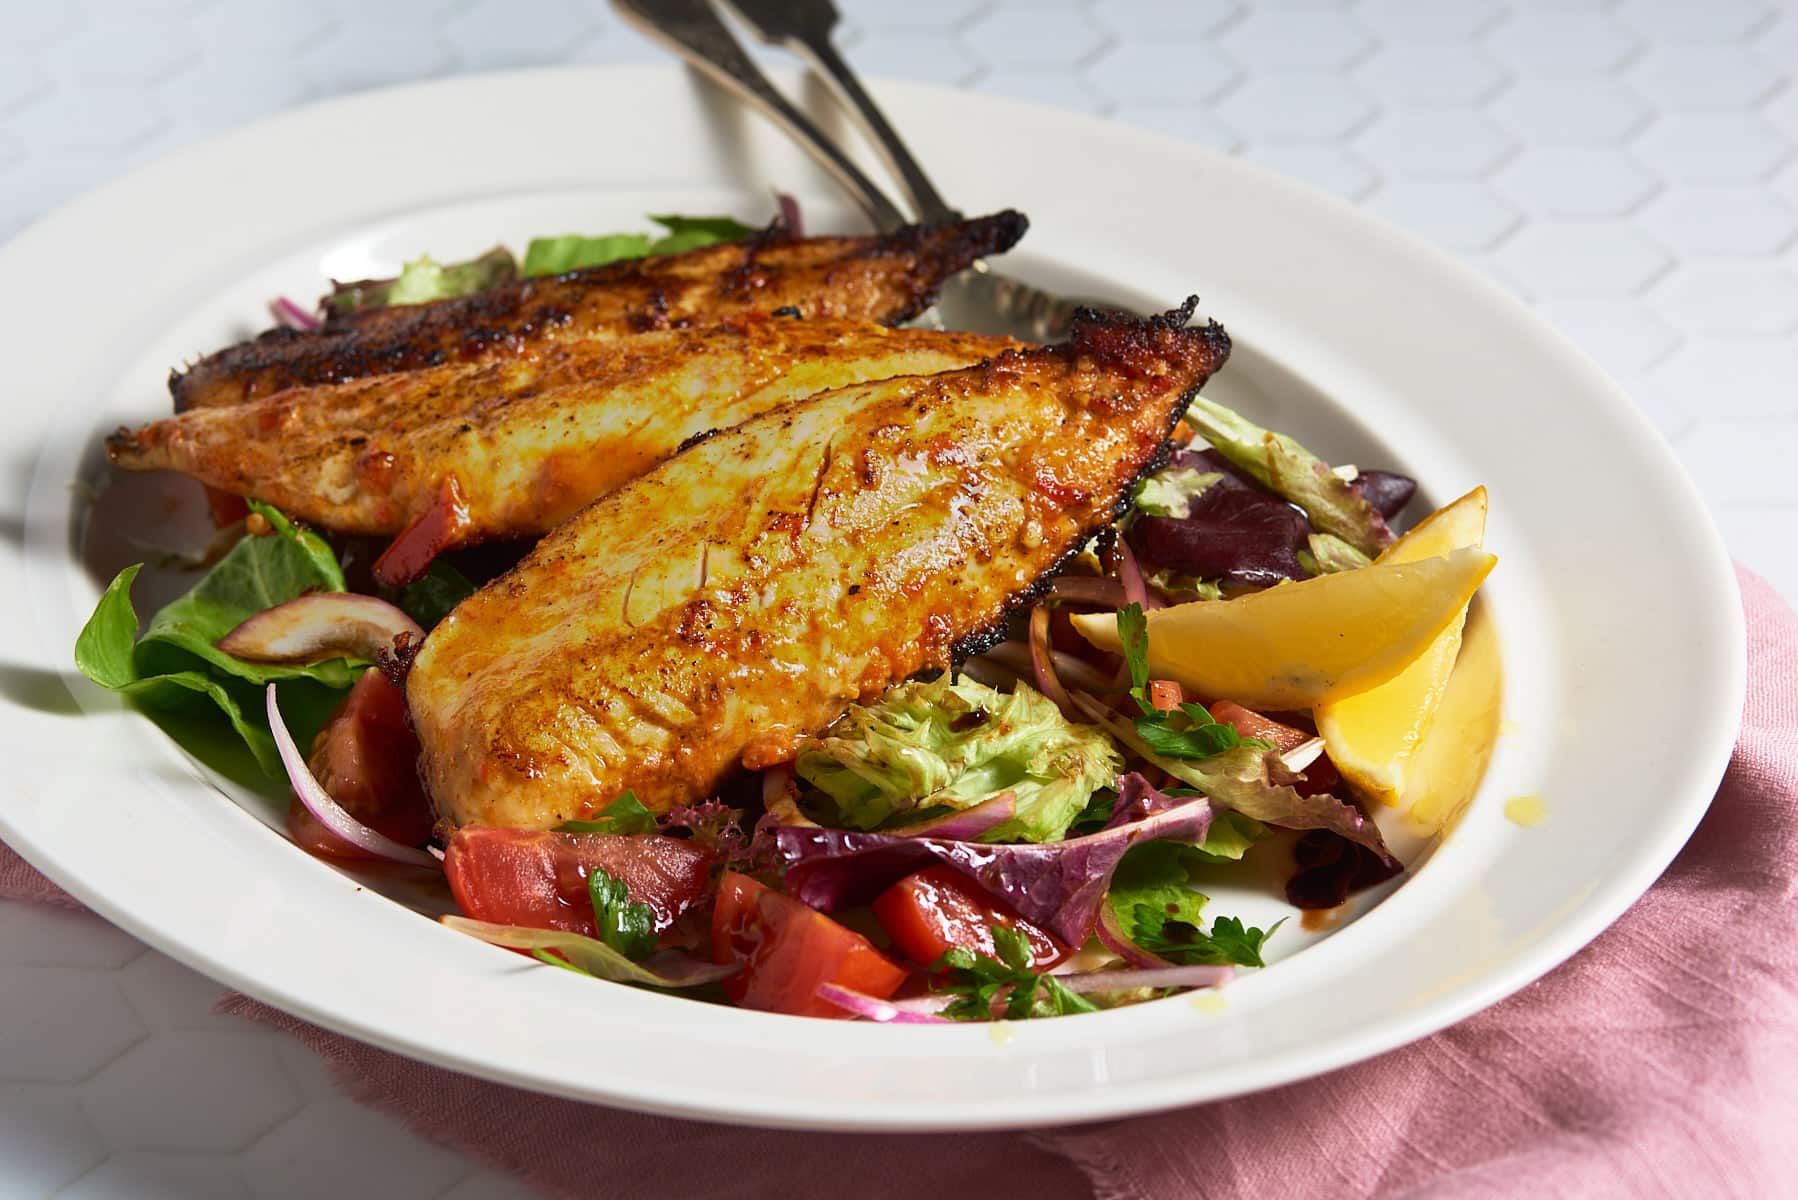 Pan fried mackerel with a devilled marinade and a tomato and red onion salad.